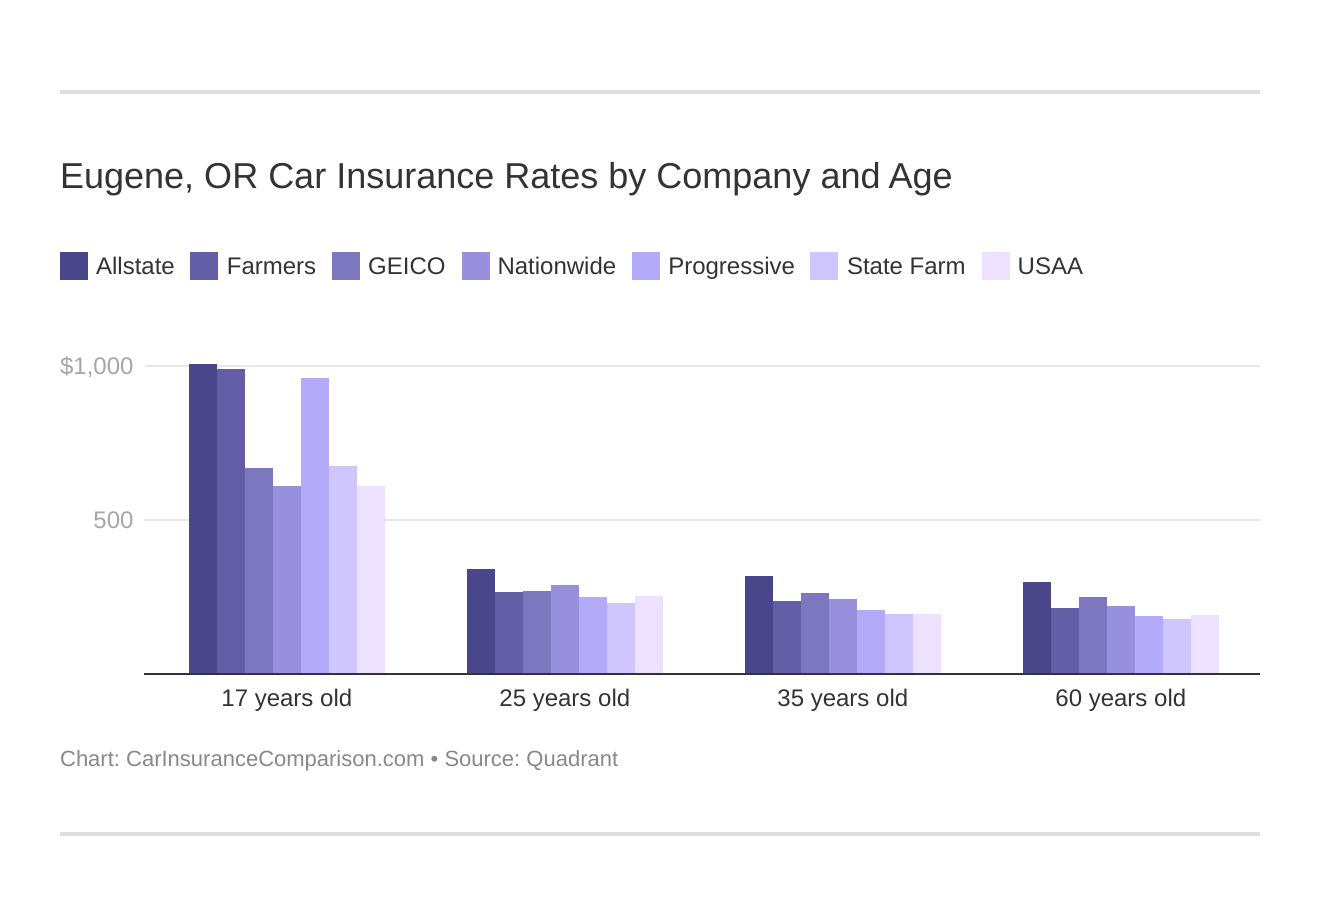 Eugene, OR Car Insurance Rates by Company and Age